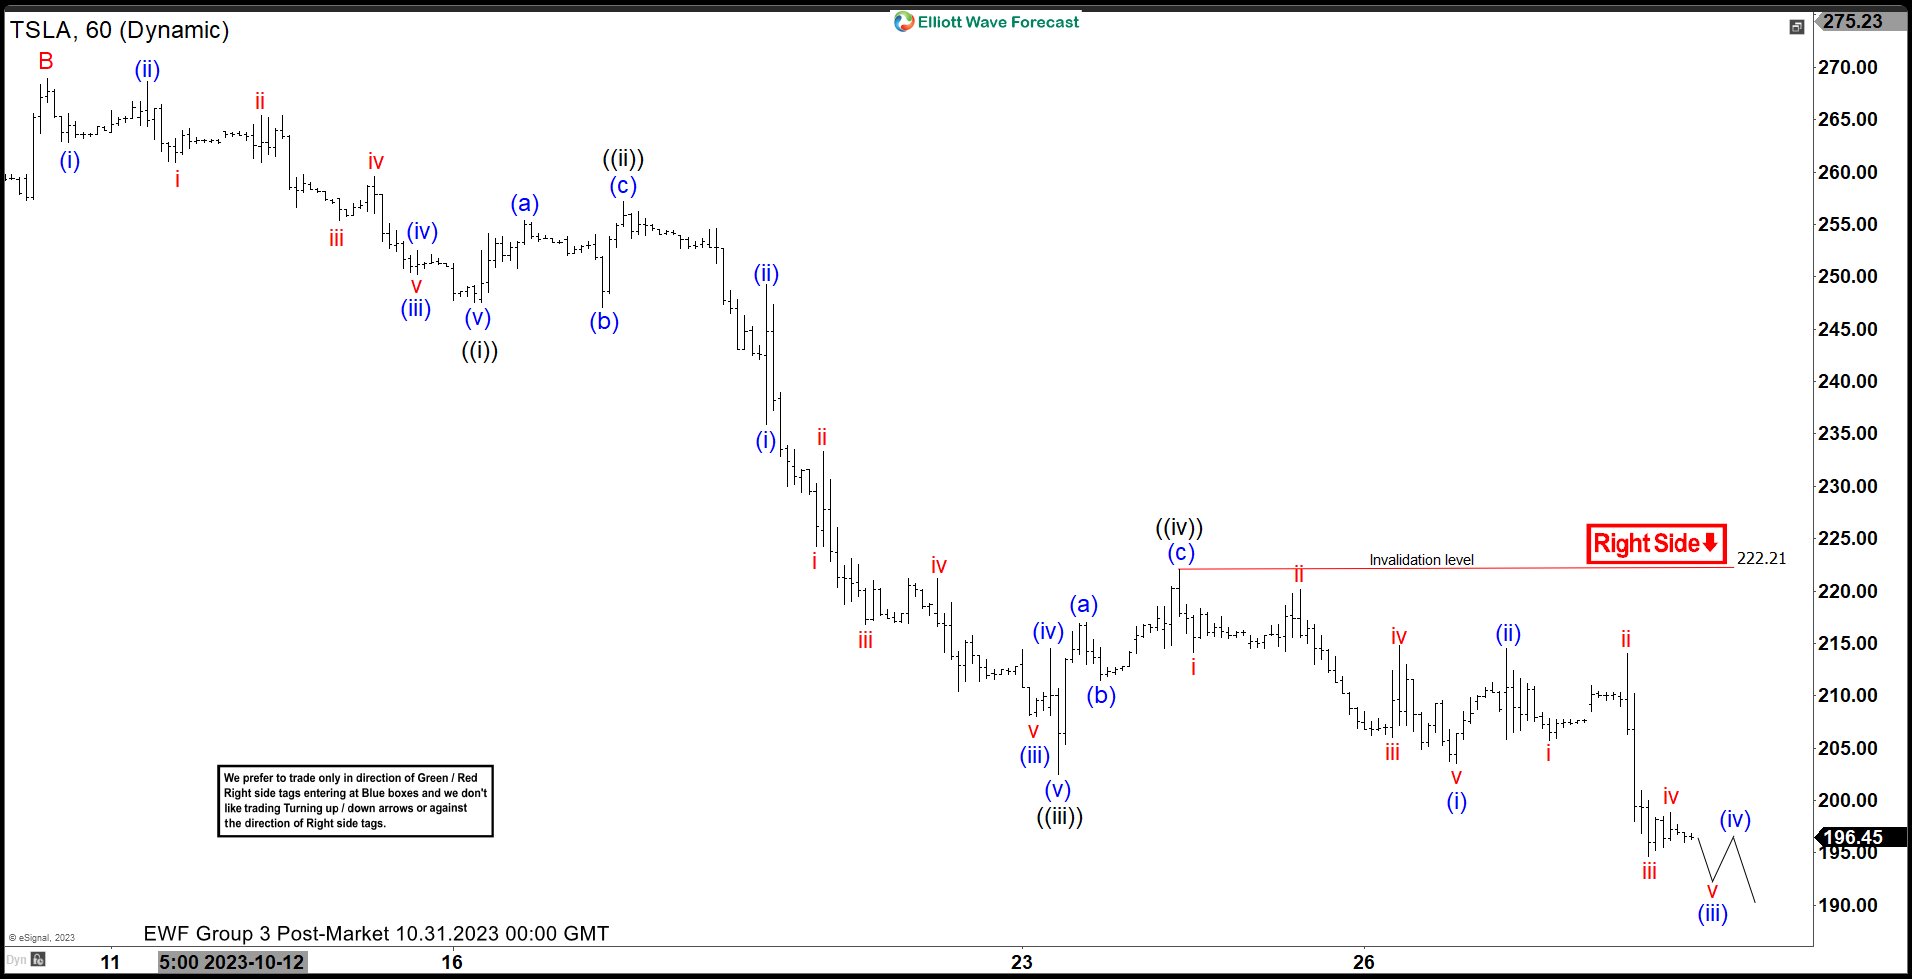 TSLA Minimum 3 Wave Bounce Is Expected To Happen